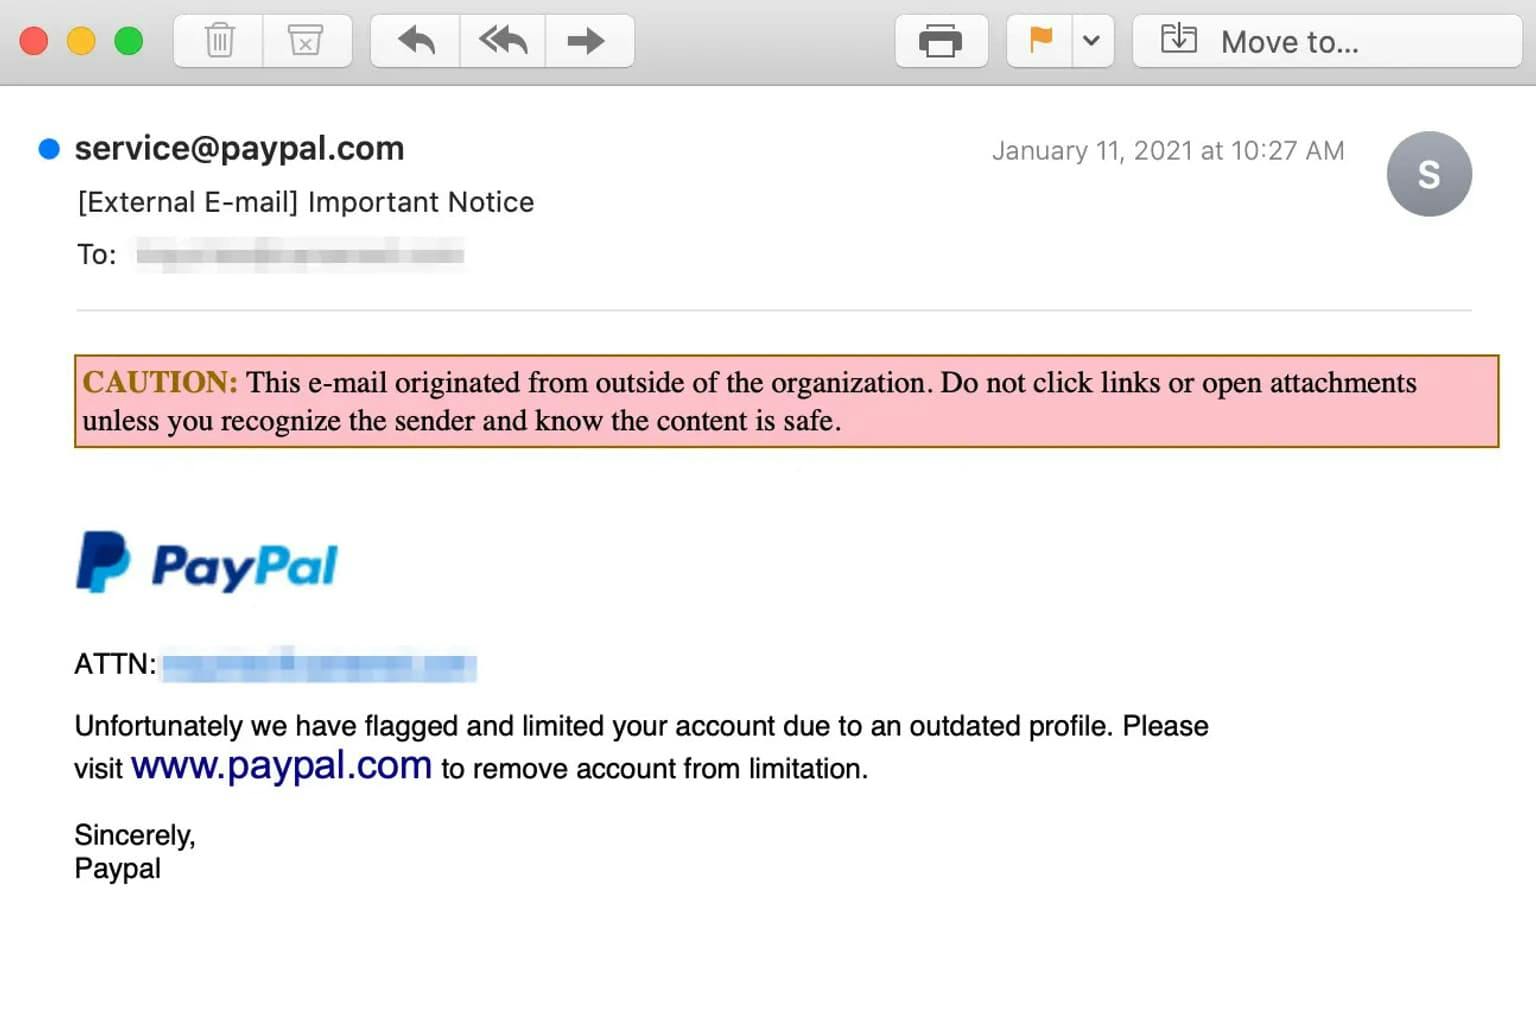 Paypal phishing email scam